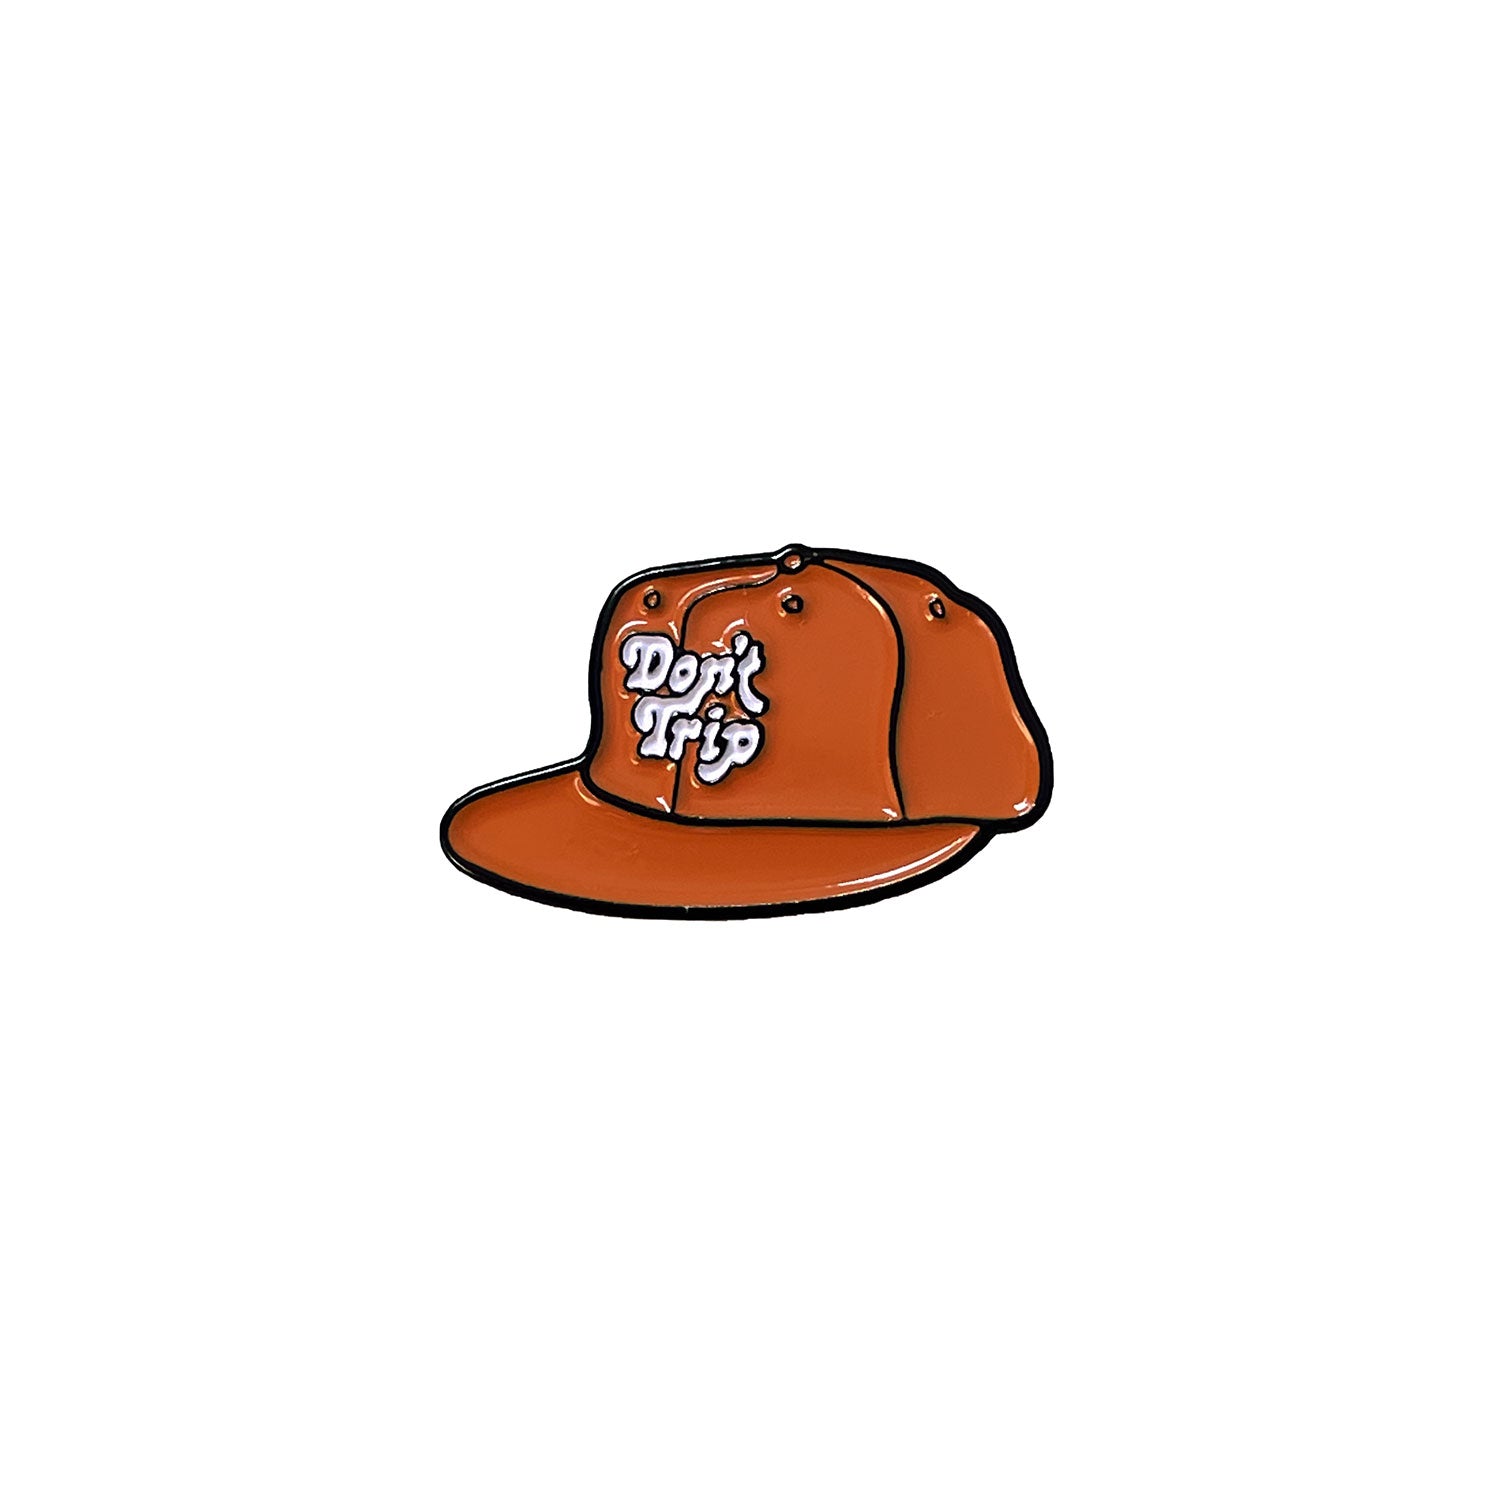 Don't Trip white and rust enamel pin hat on white background - Free & Easy